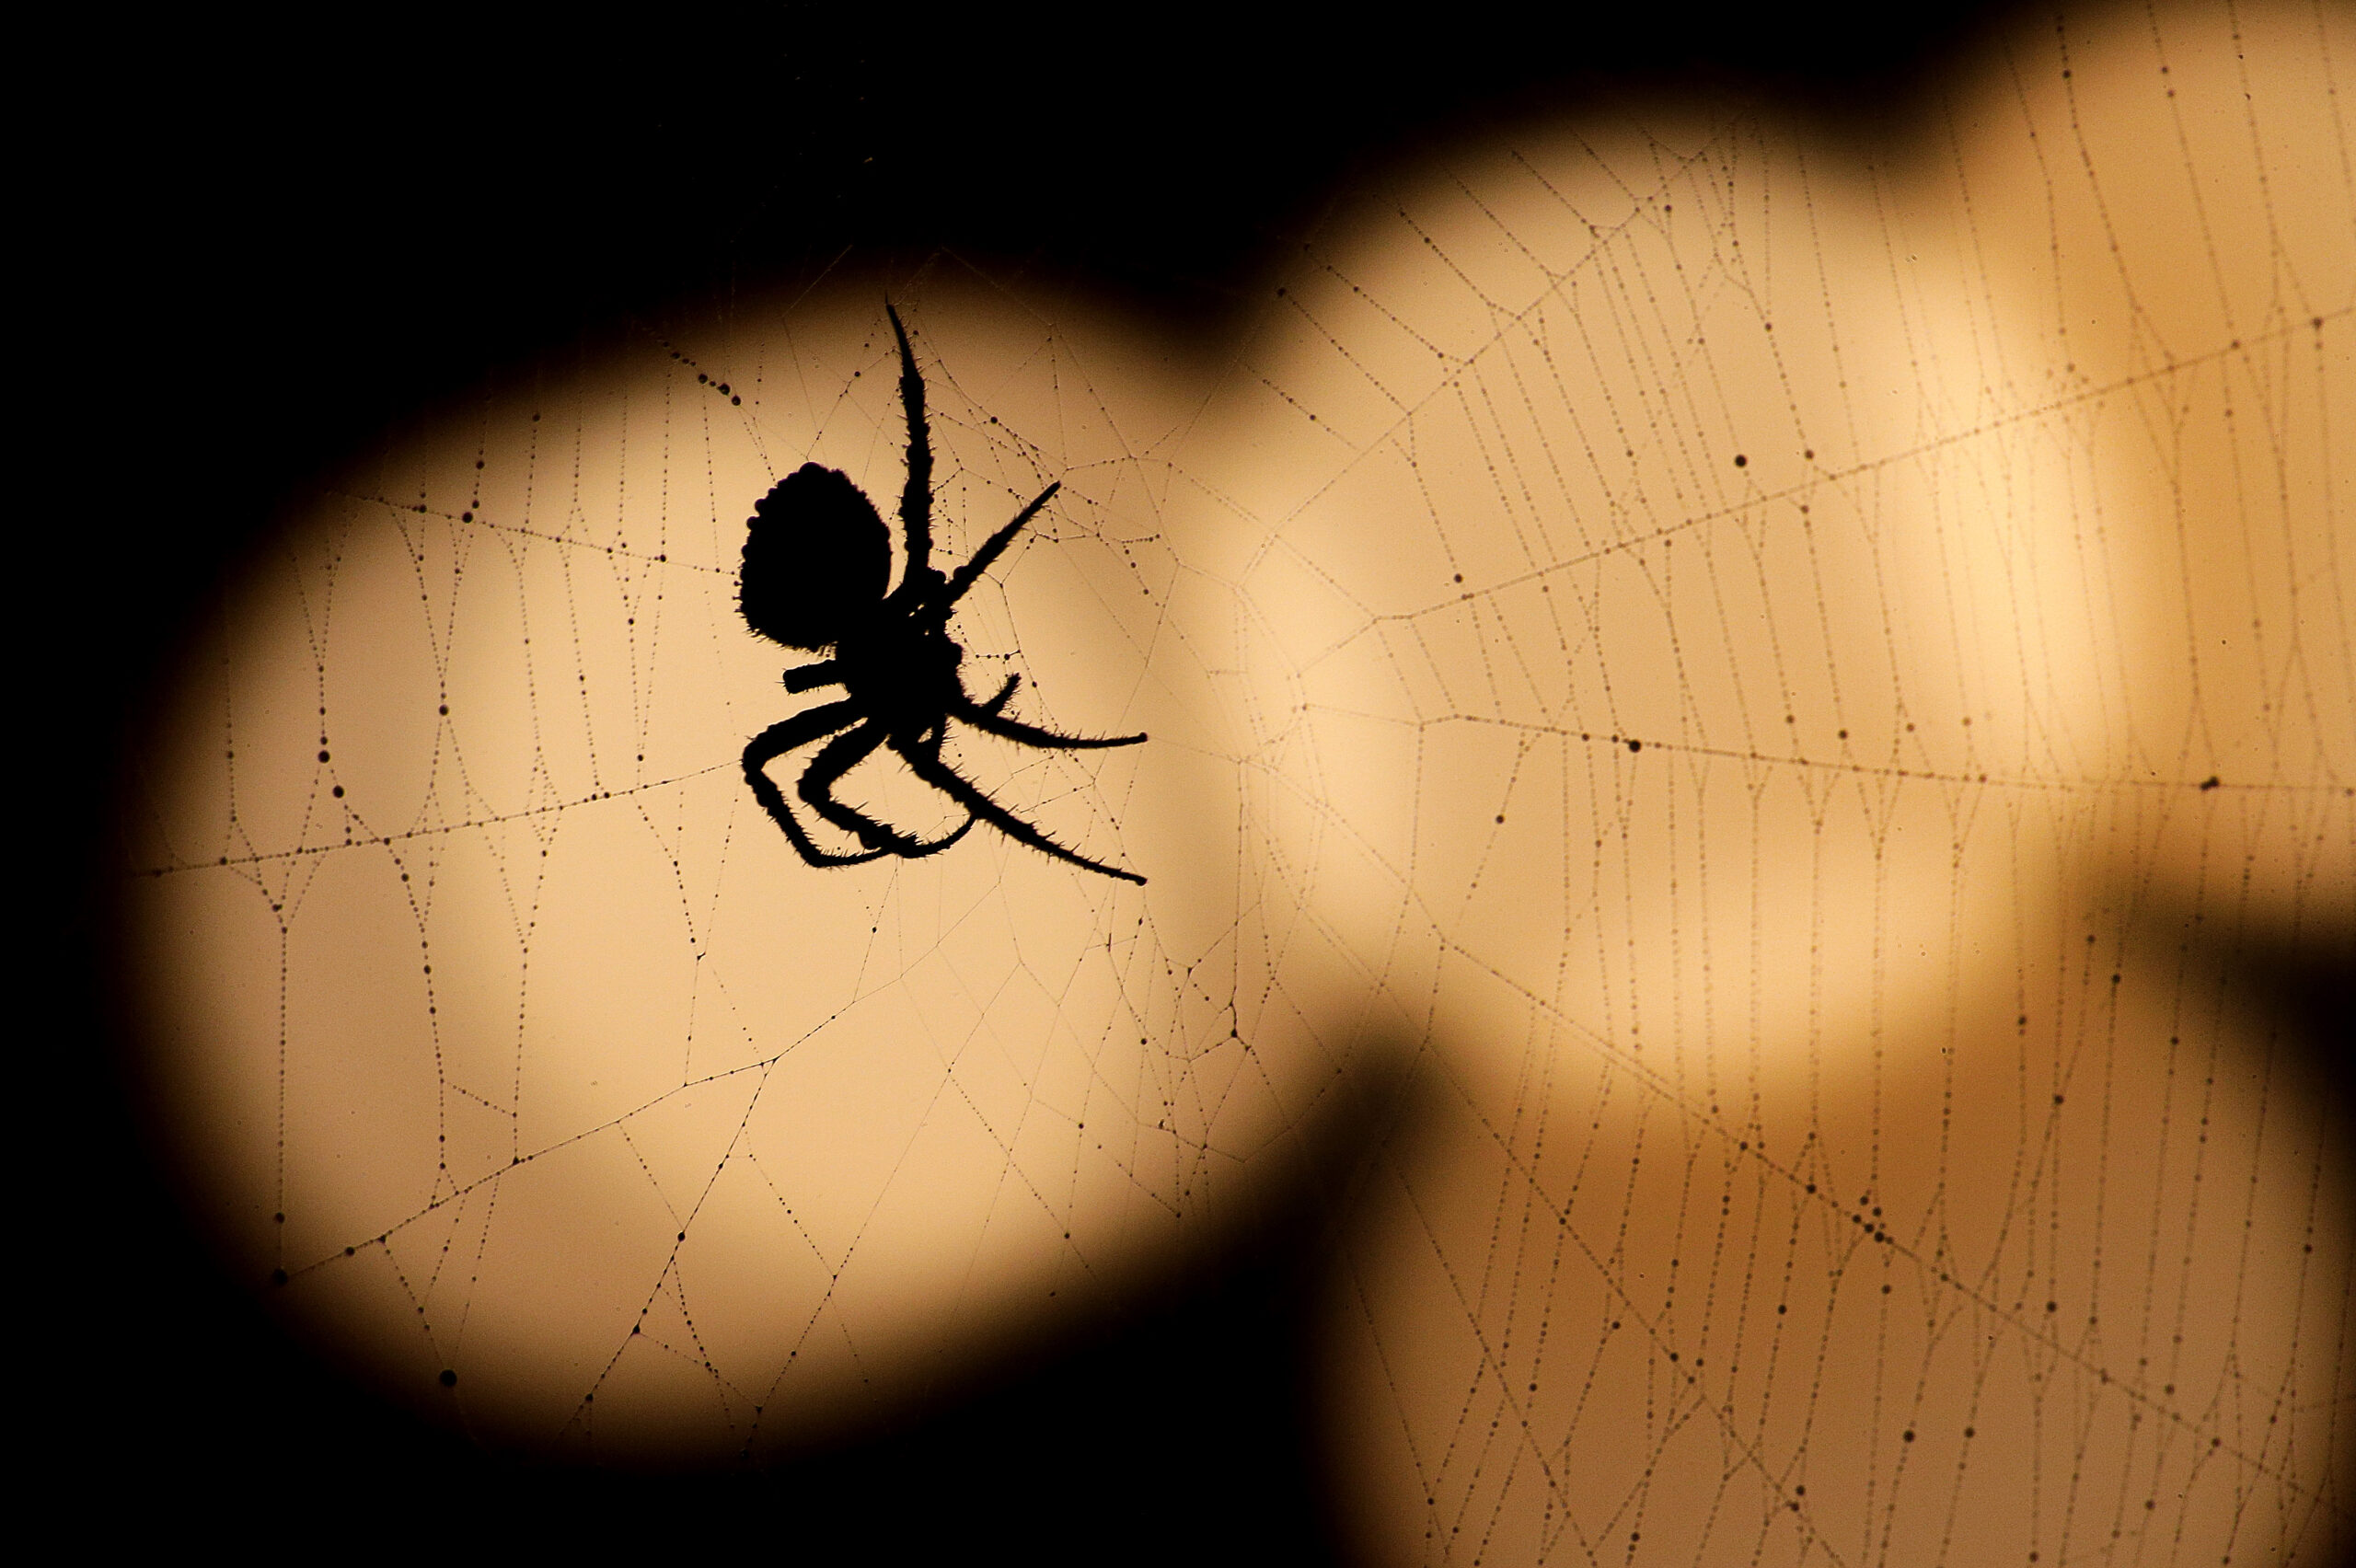 A large spider sits on its web. The picture is a silhouette, so we can't see it's coloring.